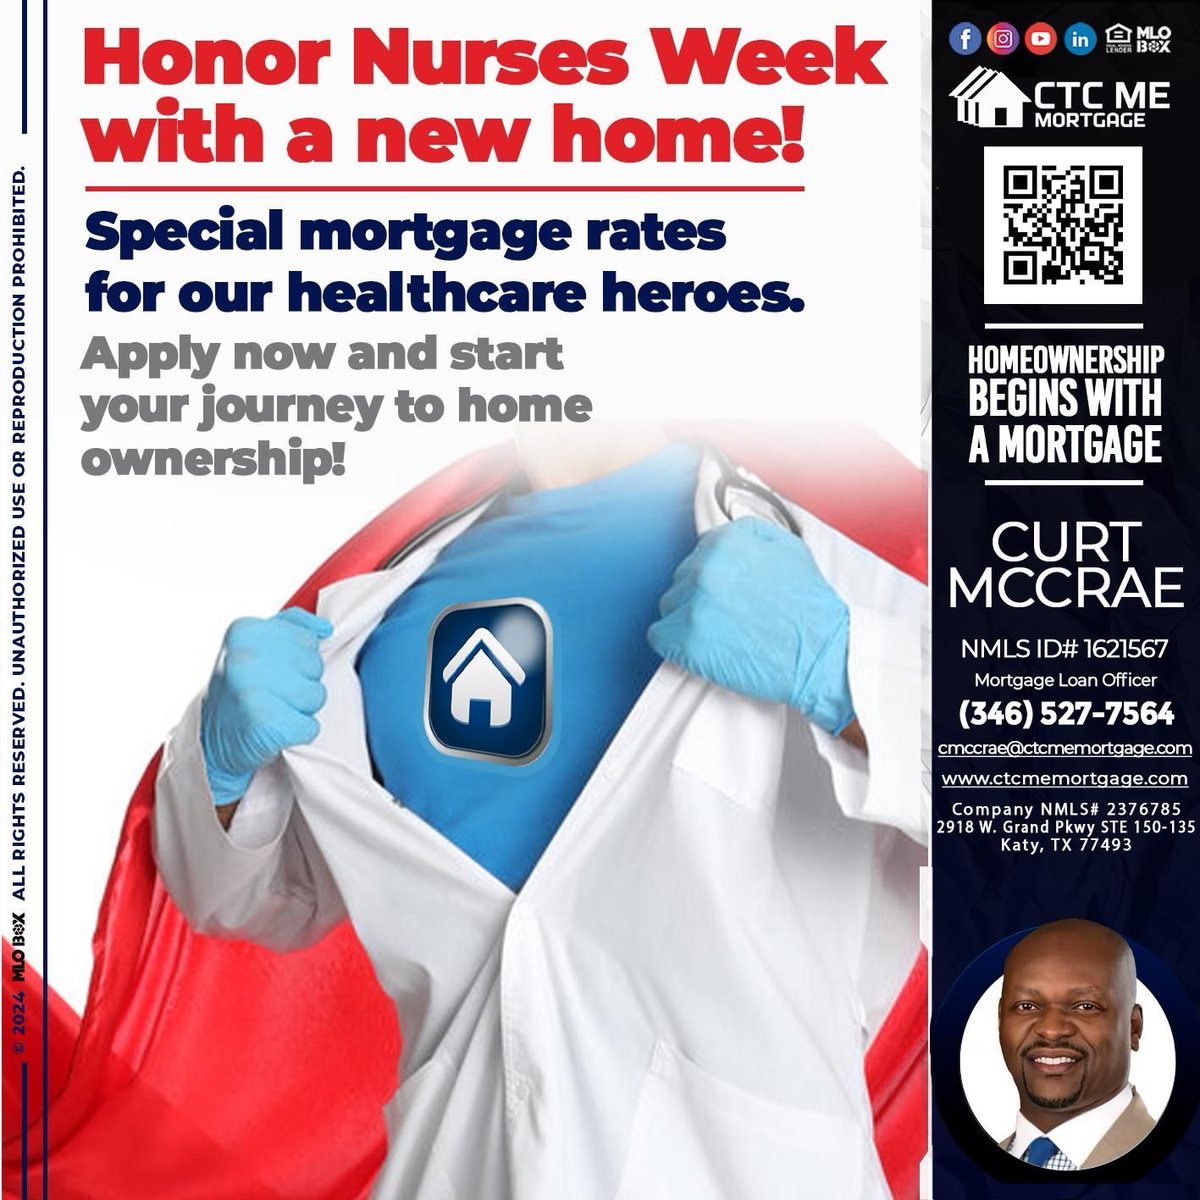 Special offer for our healthcare heroes! Exclusive mortgage rates are just for you. Contact us today to learn more🏡 ☎️ 
Click here: buff.ly/3WvoODM 
#specialoffer for #healthcareheroes! Explore our #exclusivemortgagerates. #contactustoday to know about #mortgageoffers